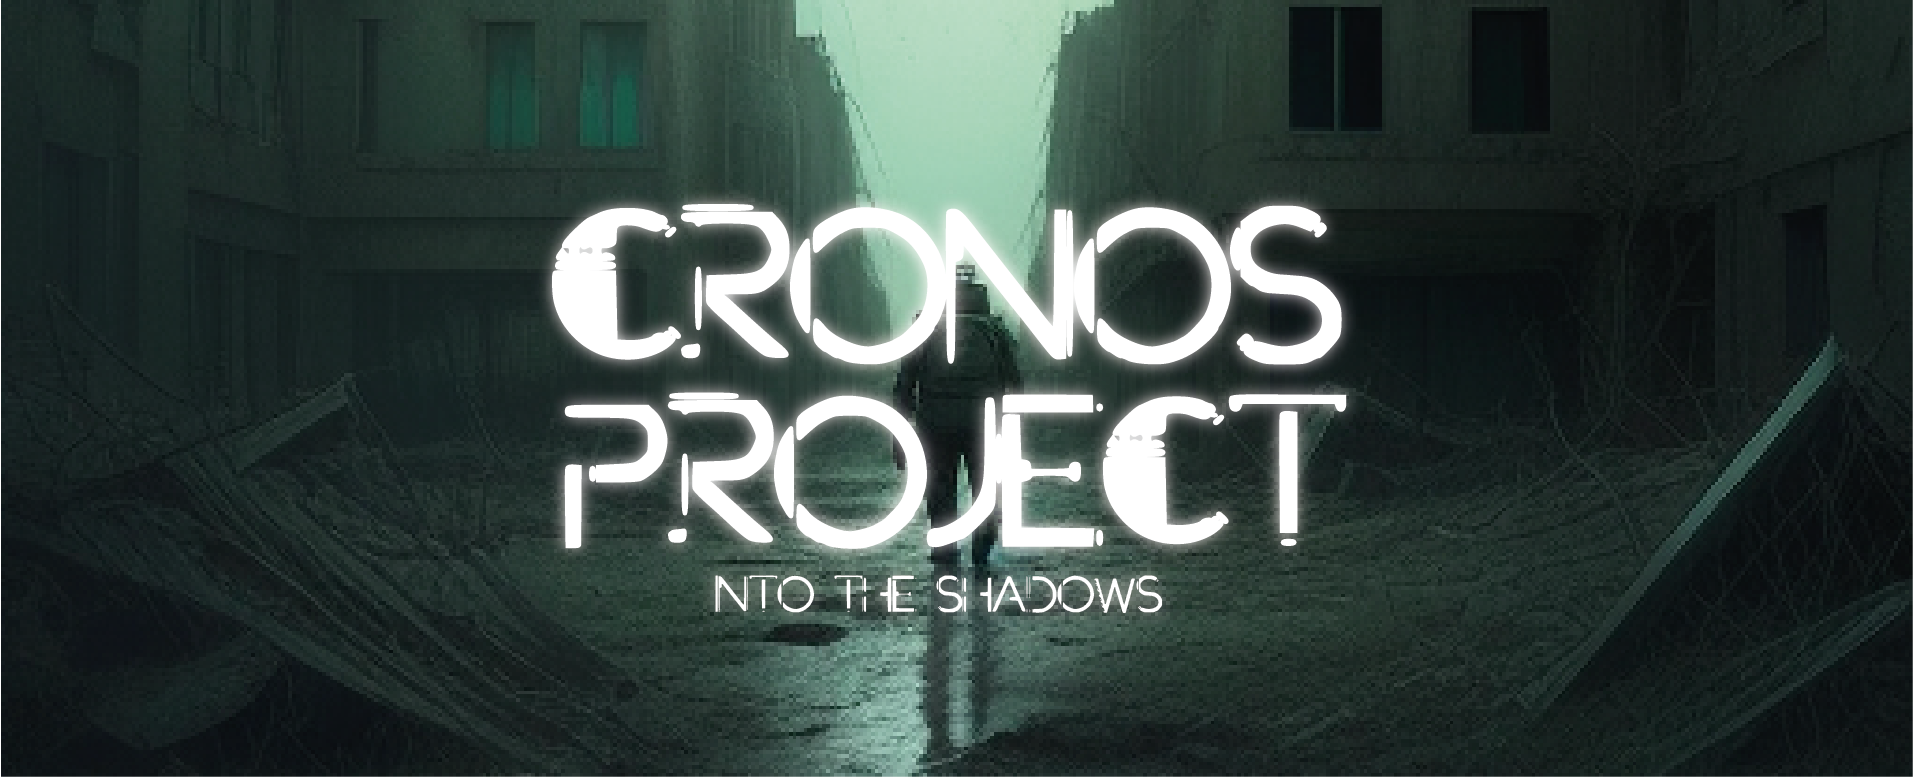 Cronos Project: Into the Shadows